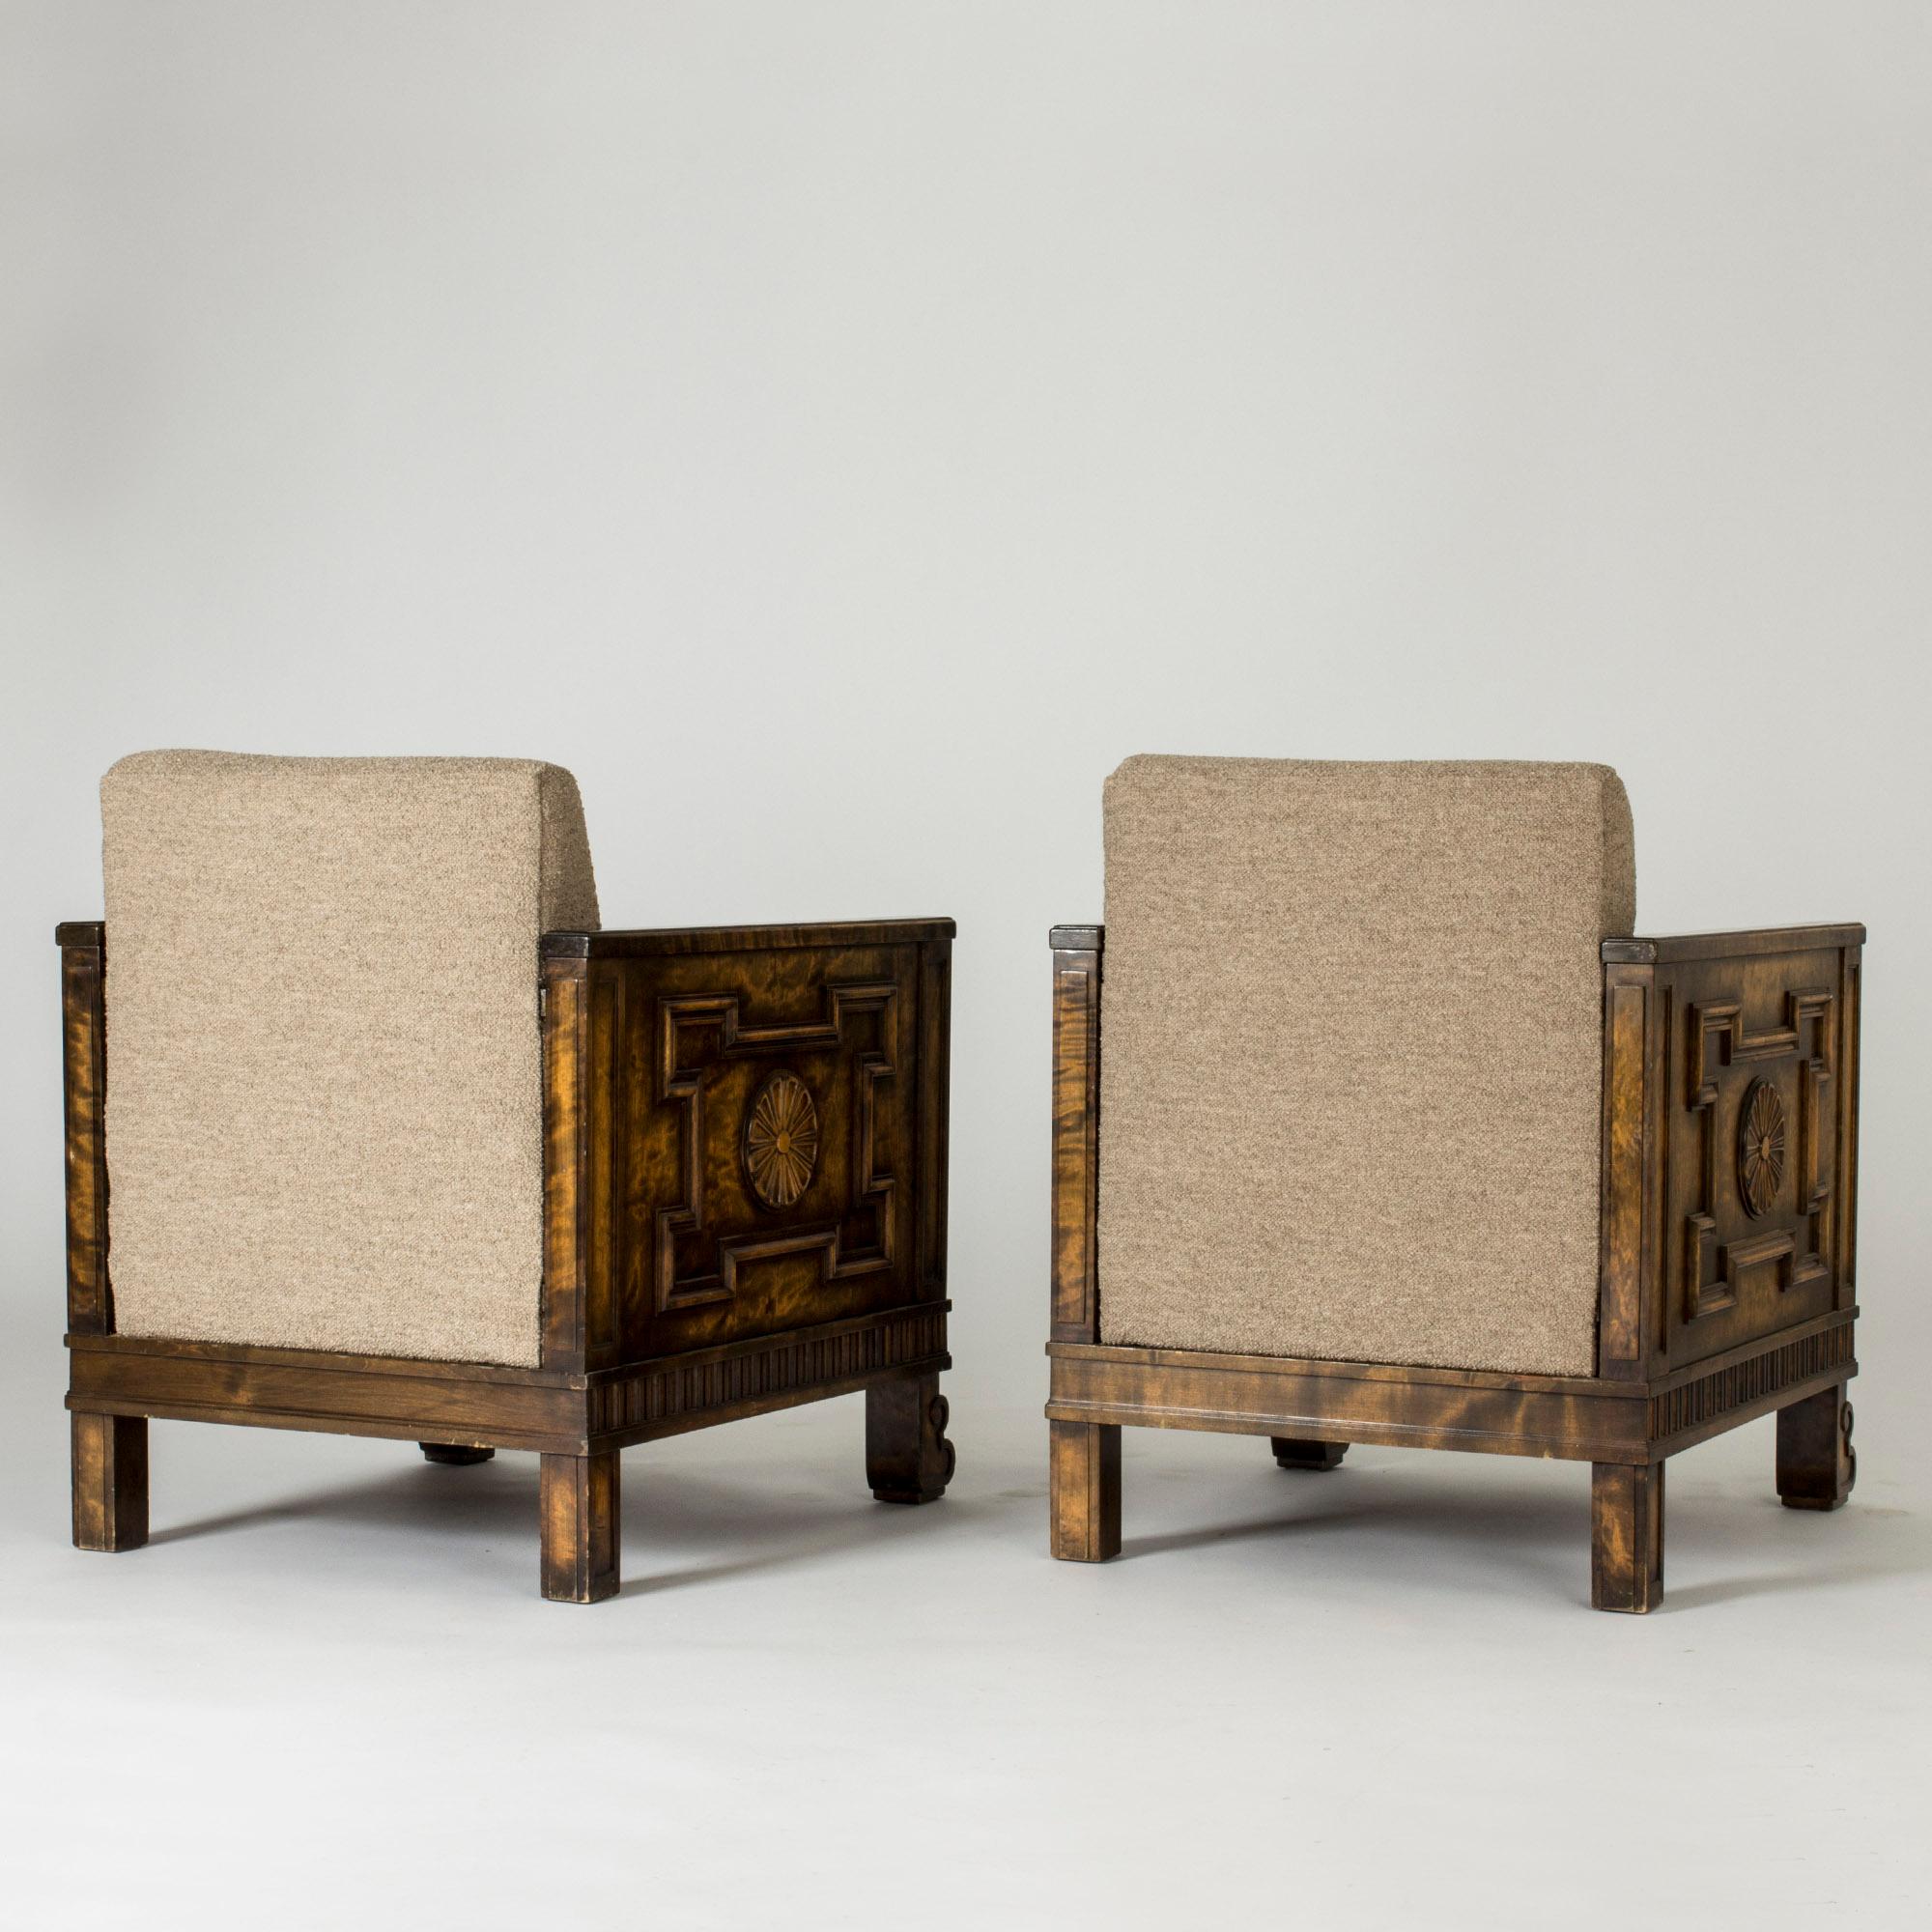 Pair of Lounge Chairs by Axel Einar Hjorth, Bodafors, Sweden, 1926 For Sale 1